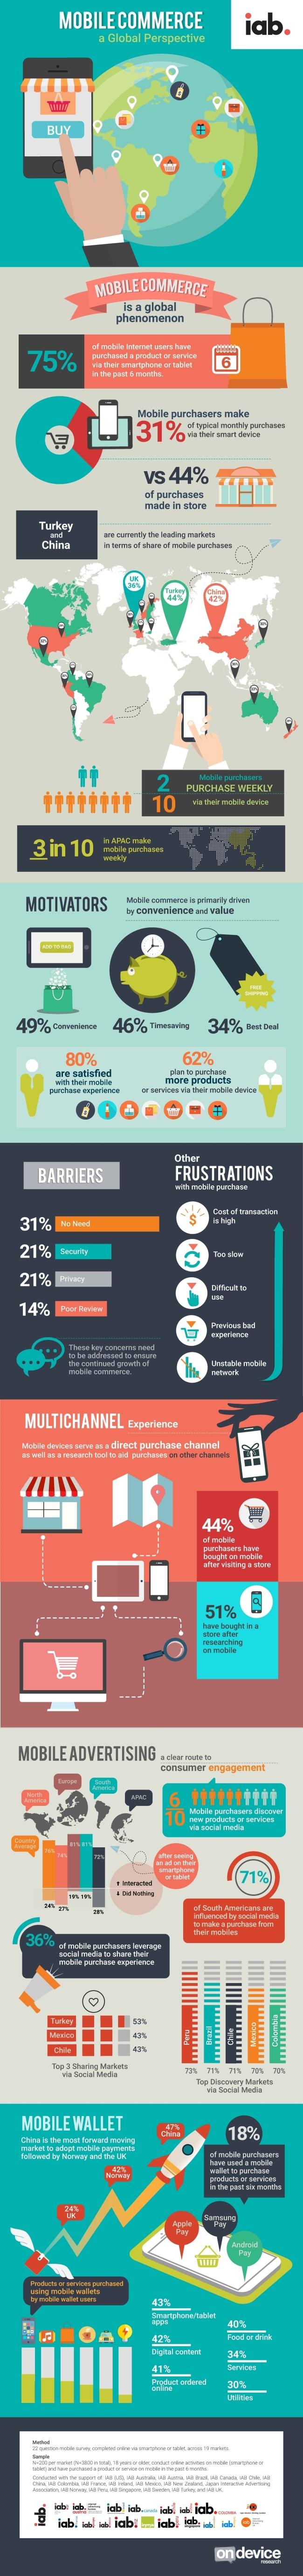 Mobile Commerce: A Global Perspective infographic